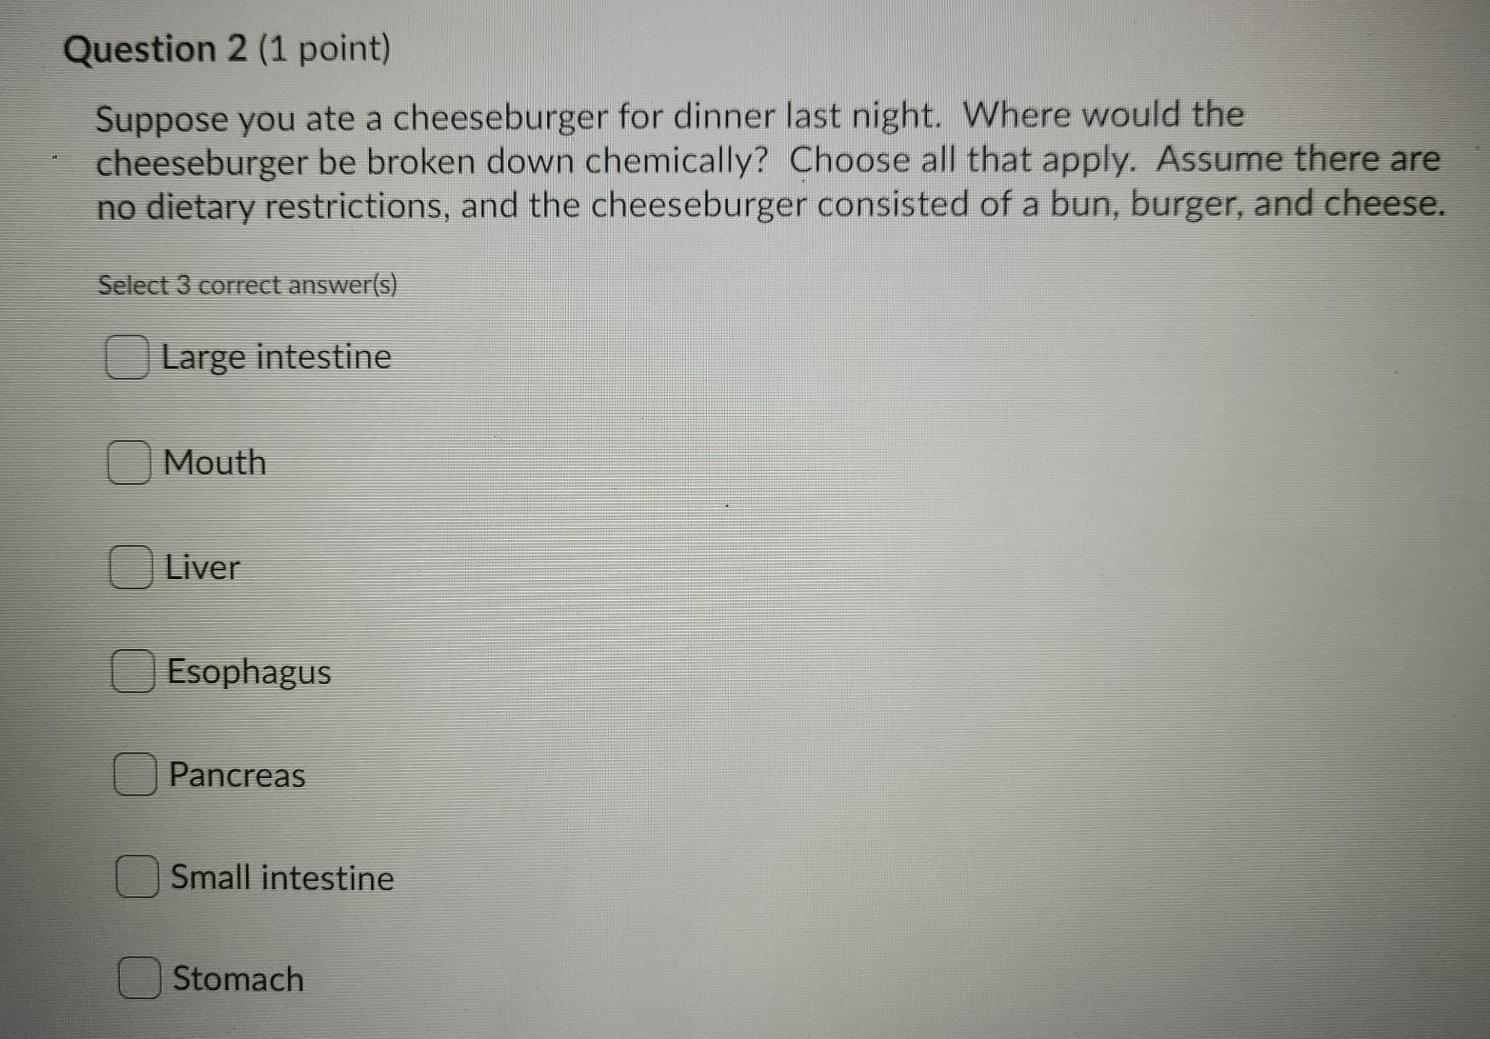 Question 2 (1 point) Suppose you ate a cheeseburger for dinner last night. Where would the cheeseburger be broken down chemic